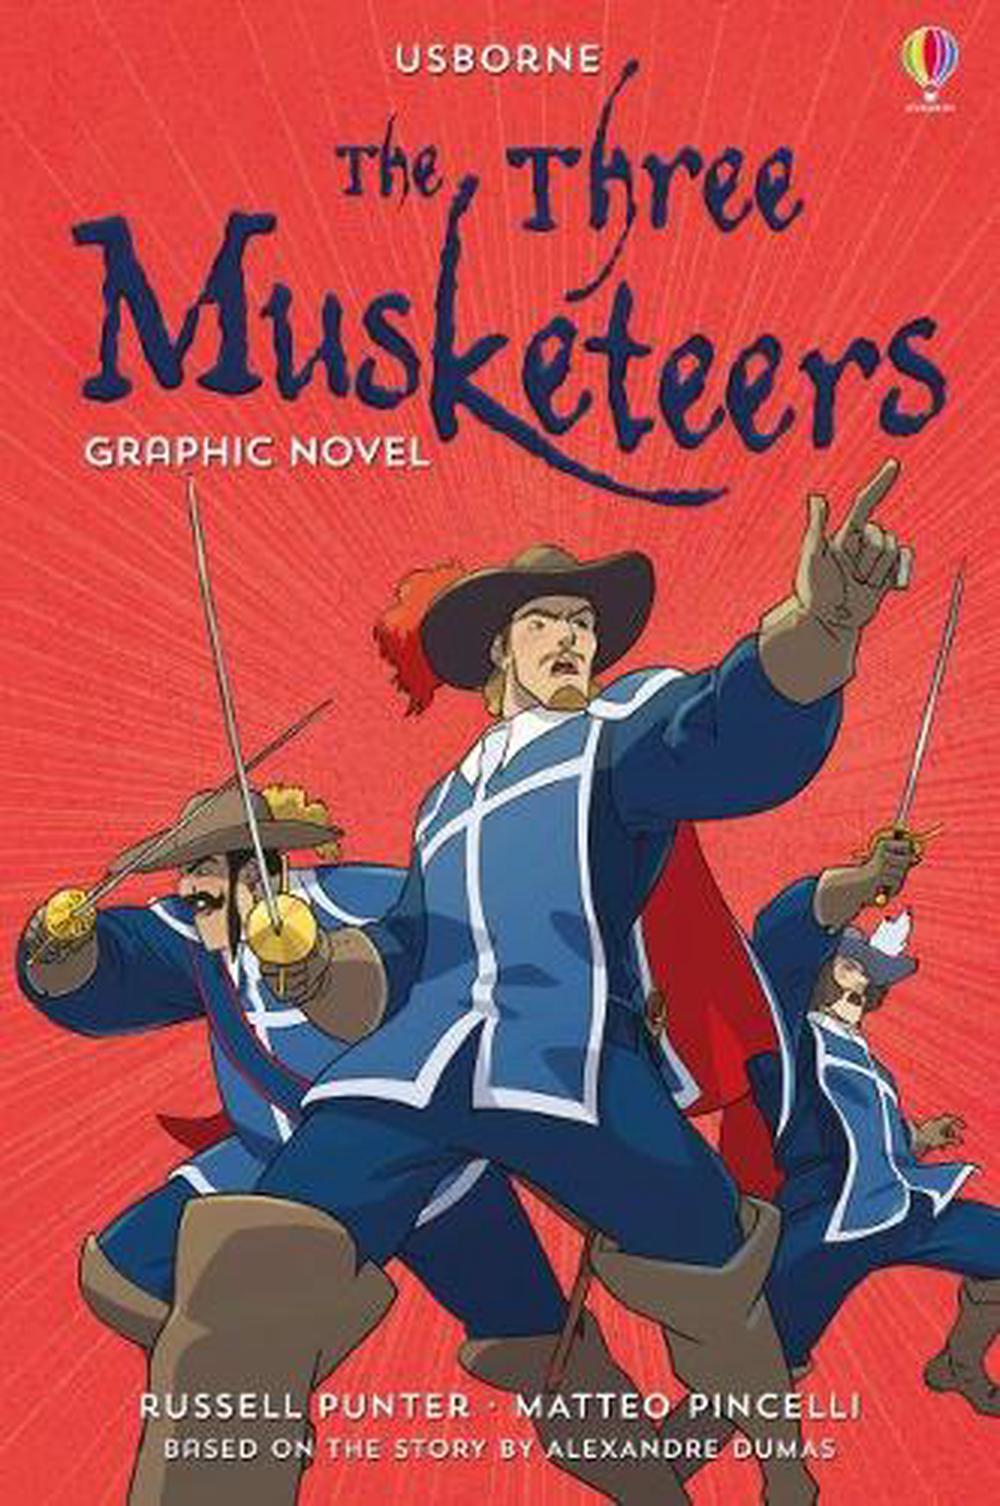 book review 3 musketeers